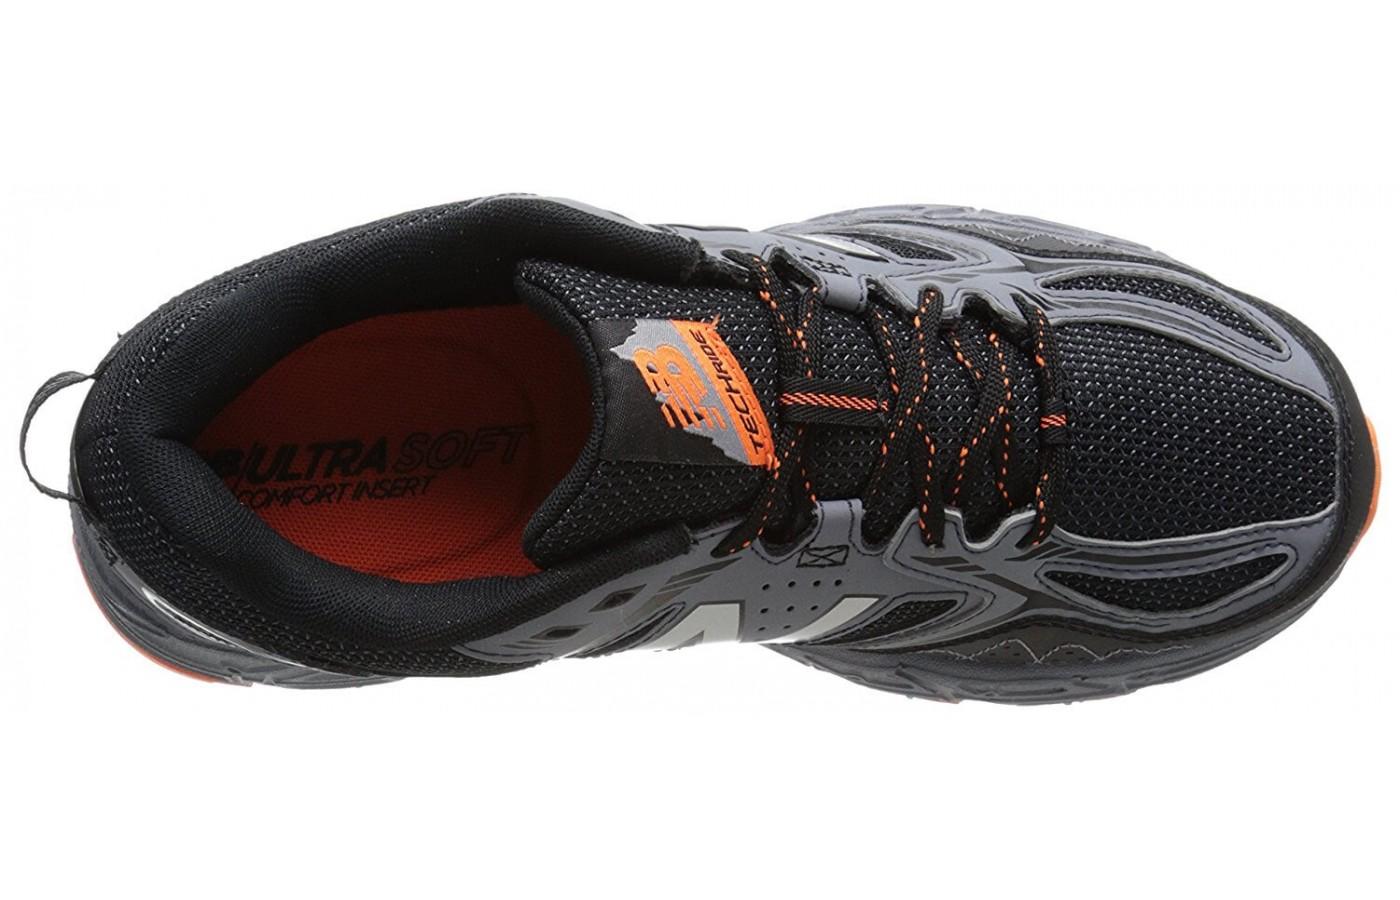 The breathable upper provides a comfortable ride. 